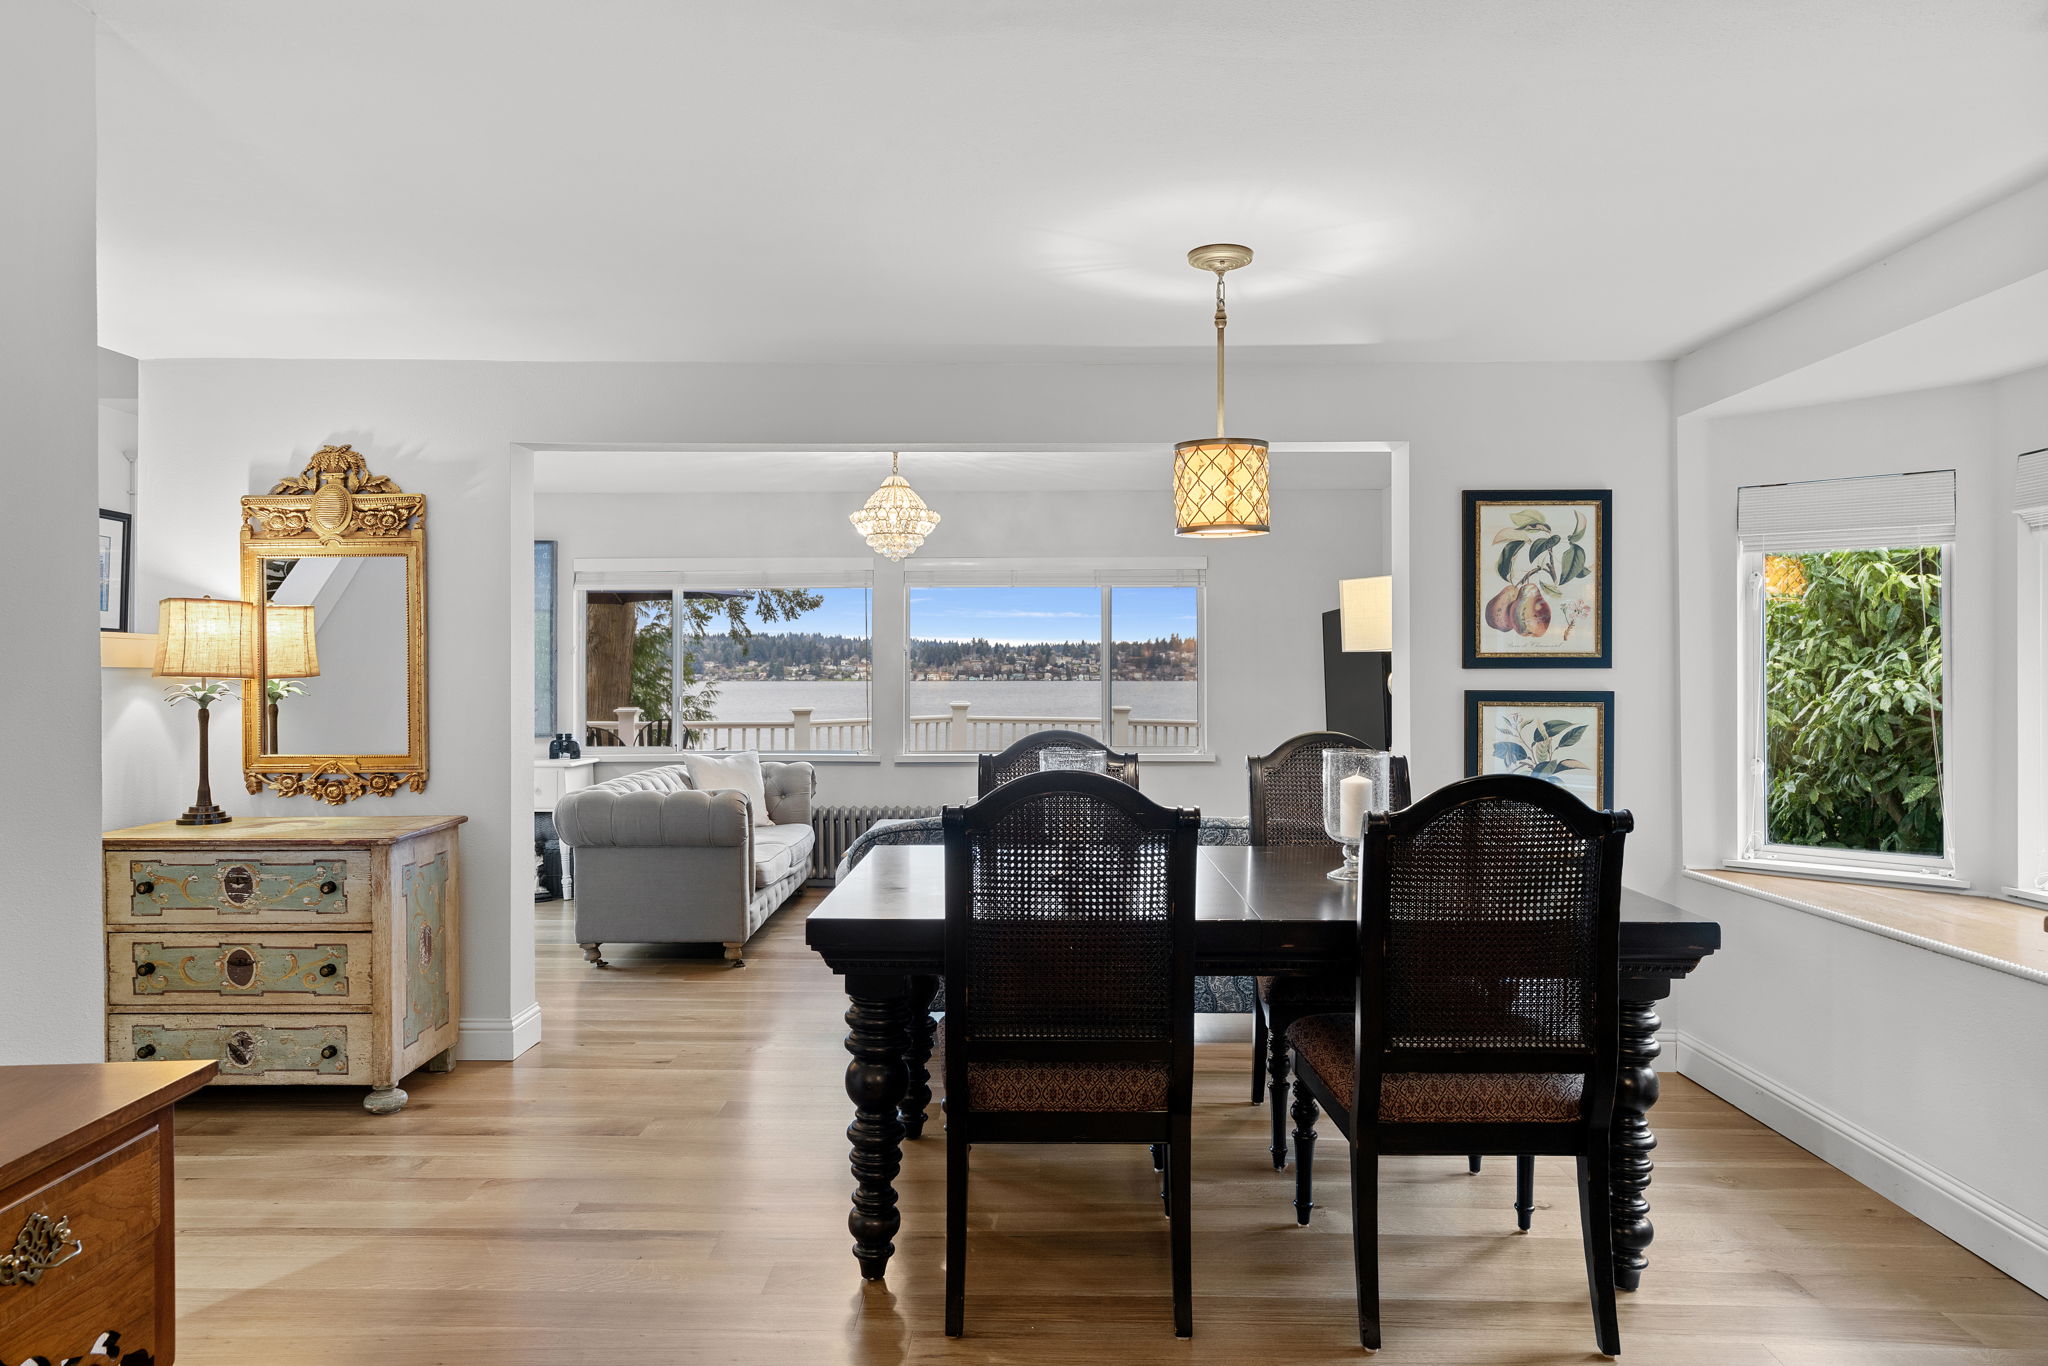 Imagine elegant dinners in this well-appointed dining room with a modern light fixture.